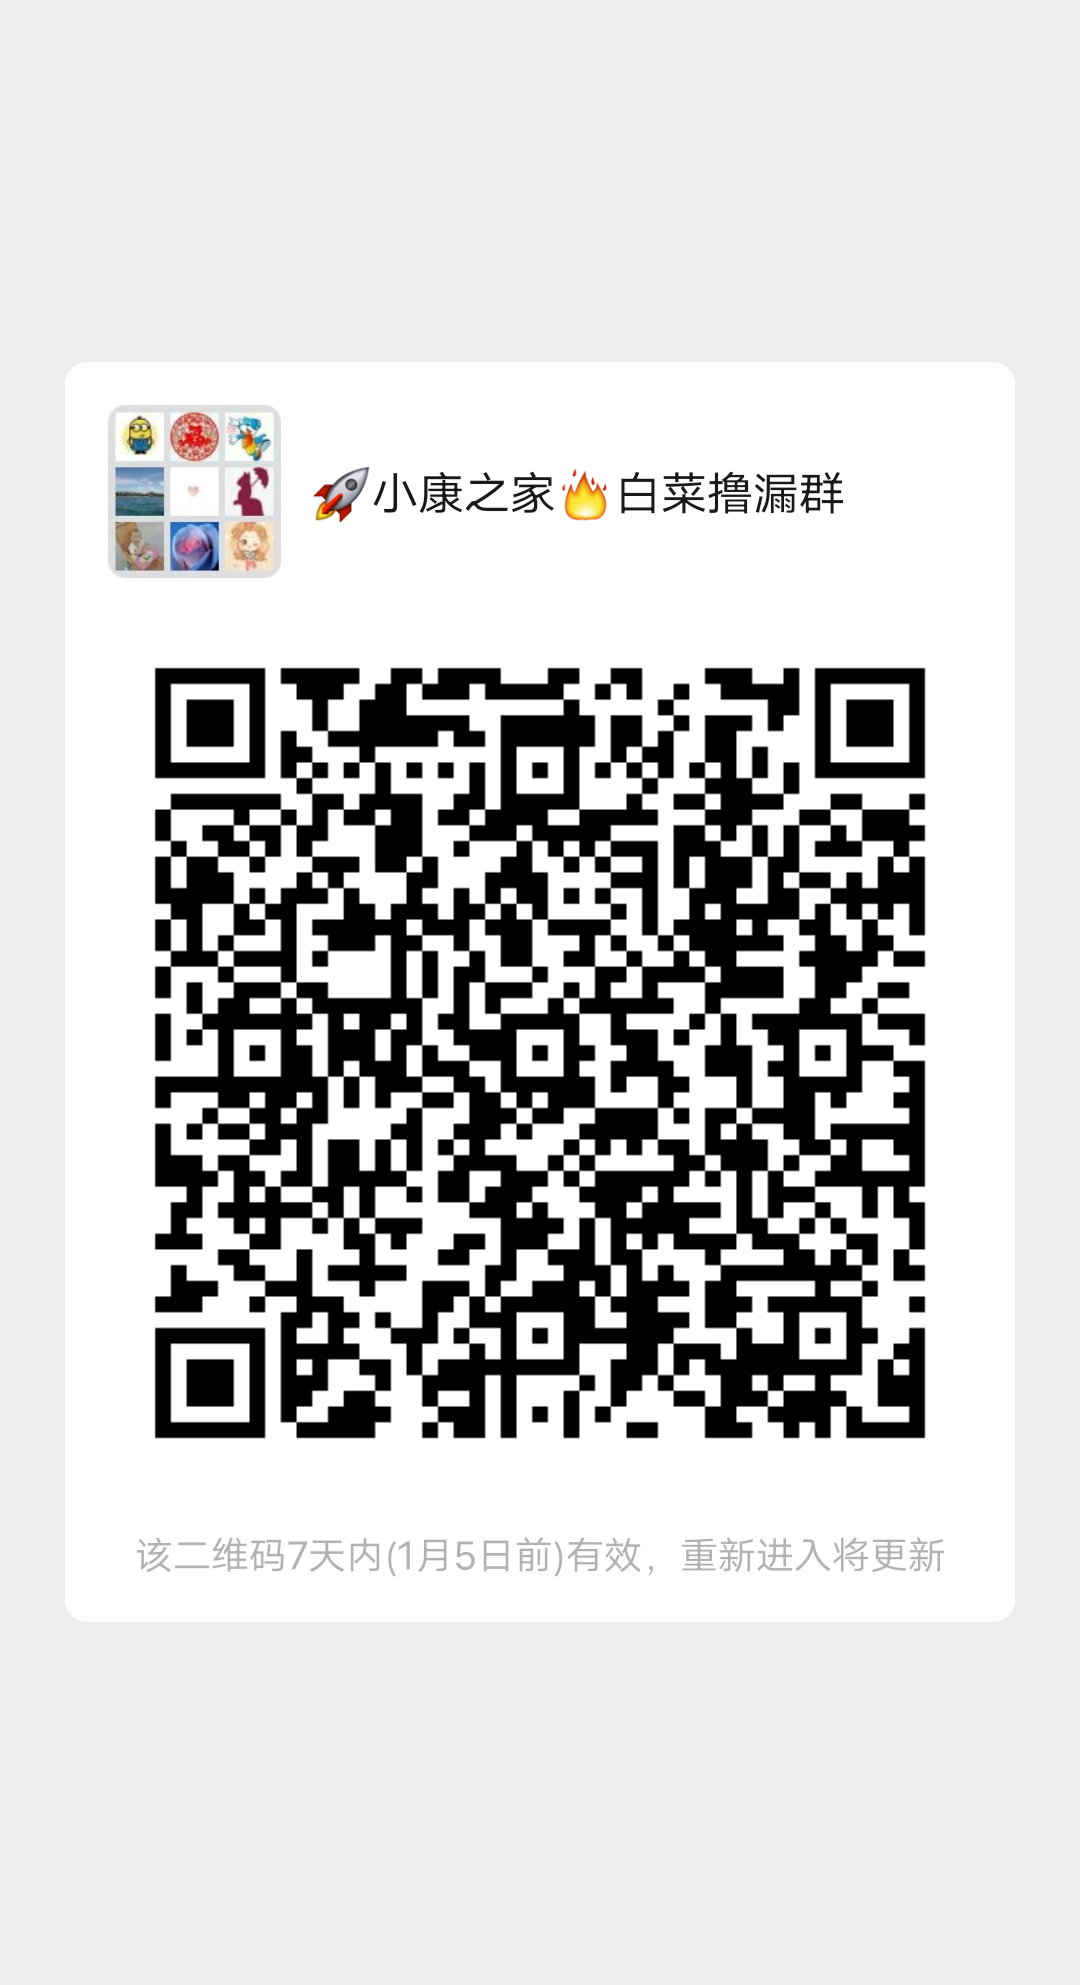 mmqrcode1609232551523.png